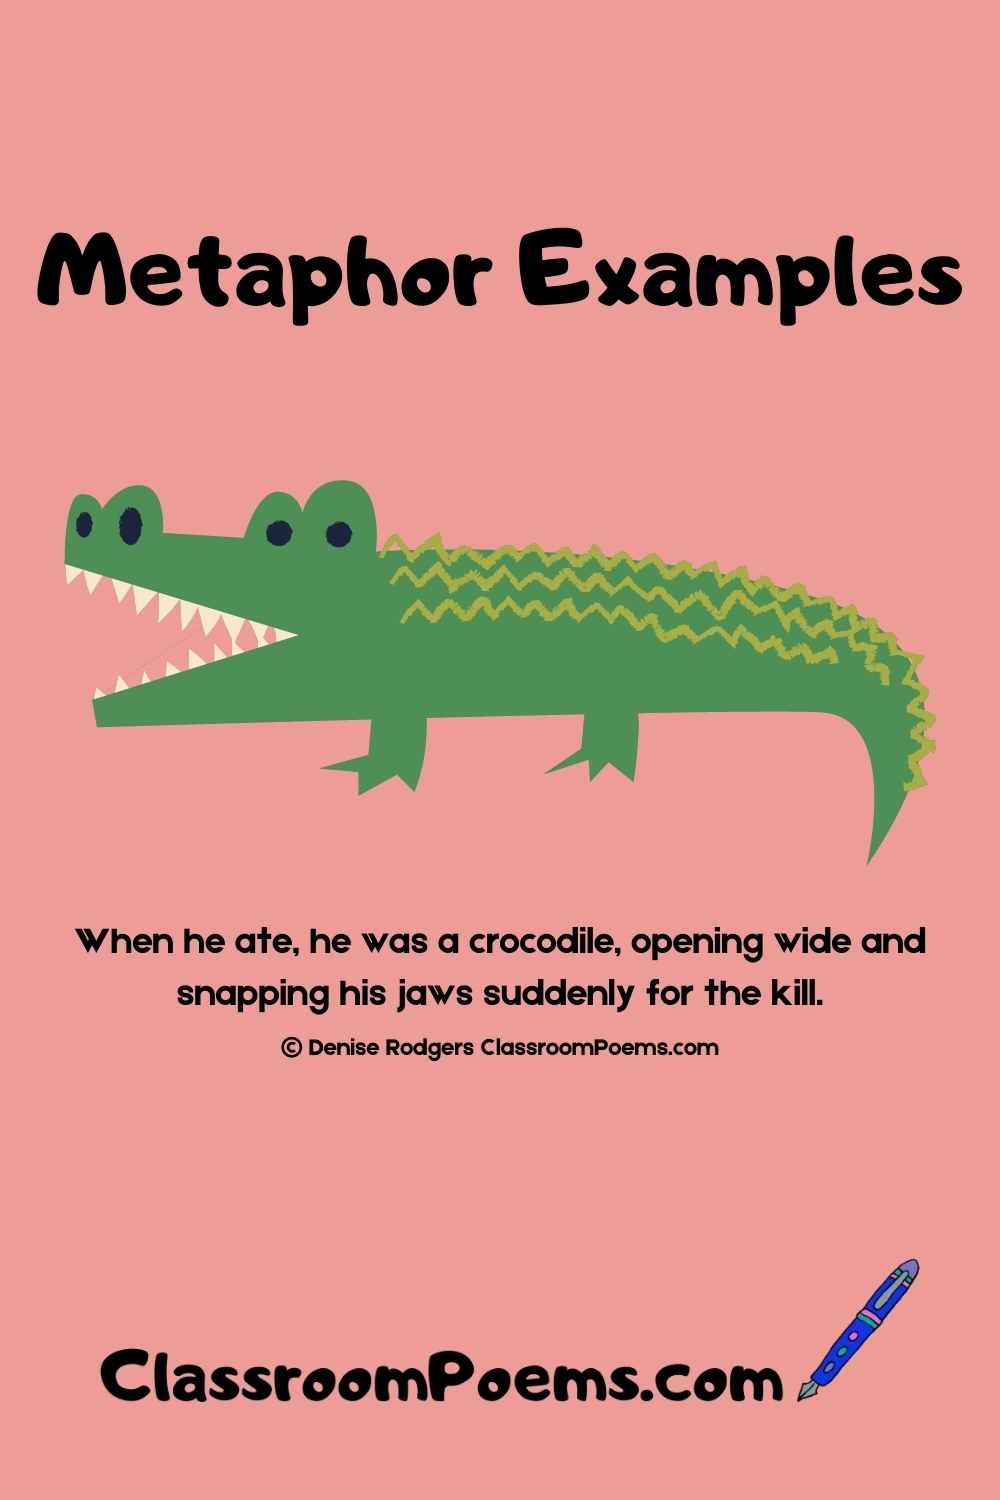 Crocodile metaphor example by Denise Rodgers on  ClassroomPoems.com.